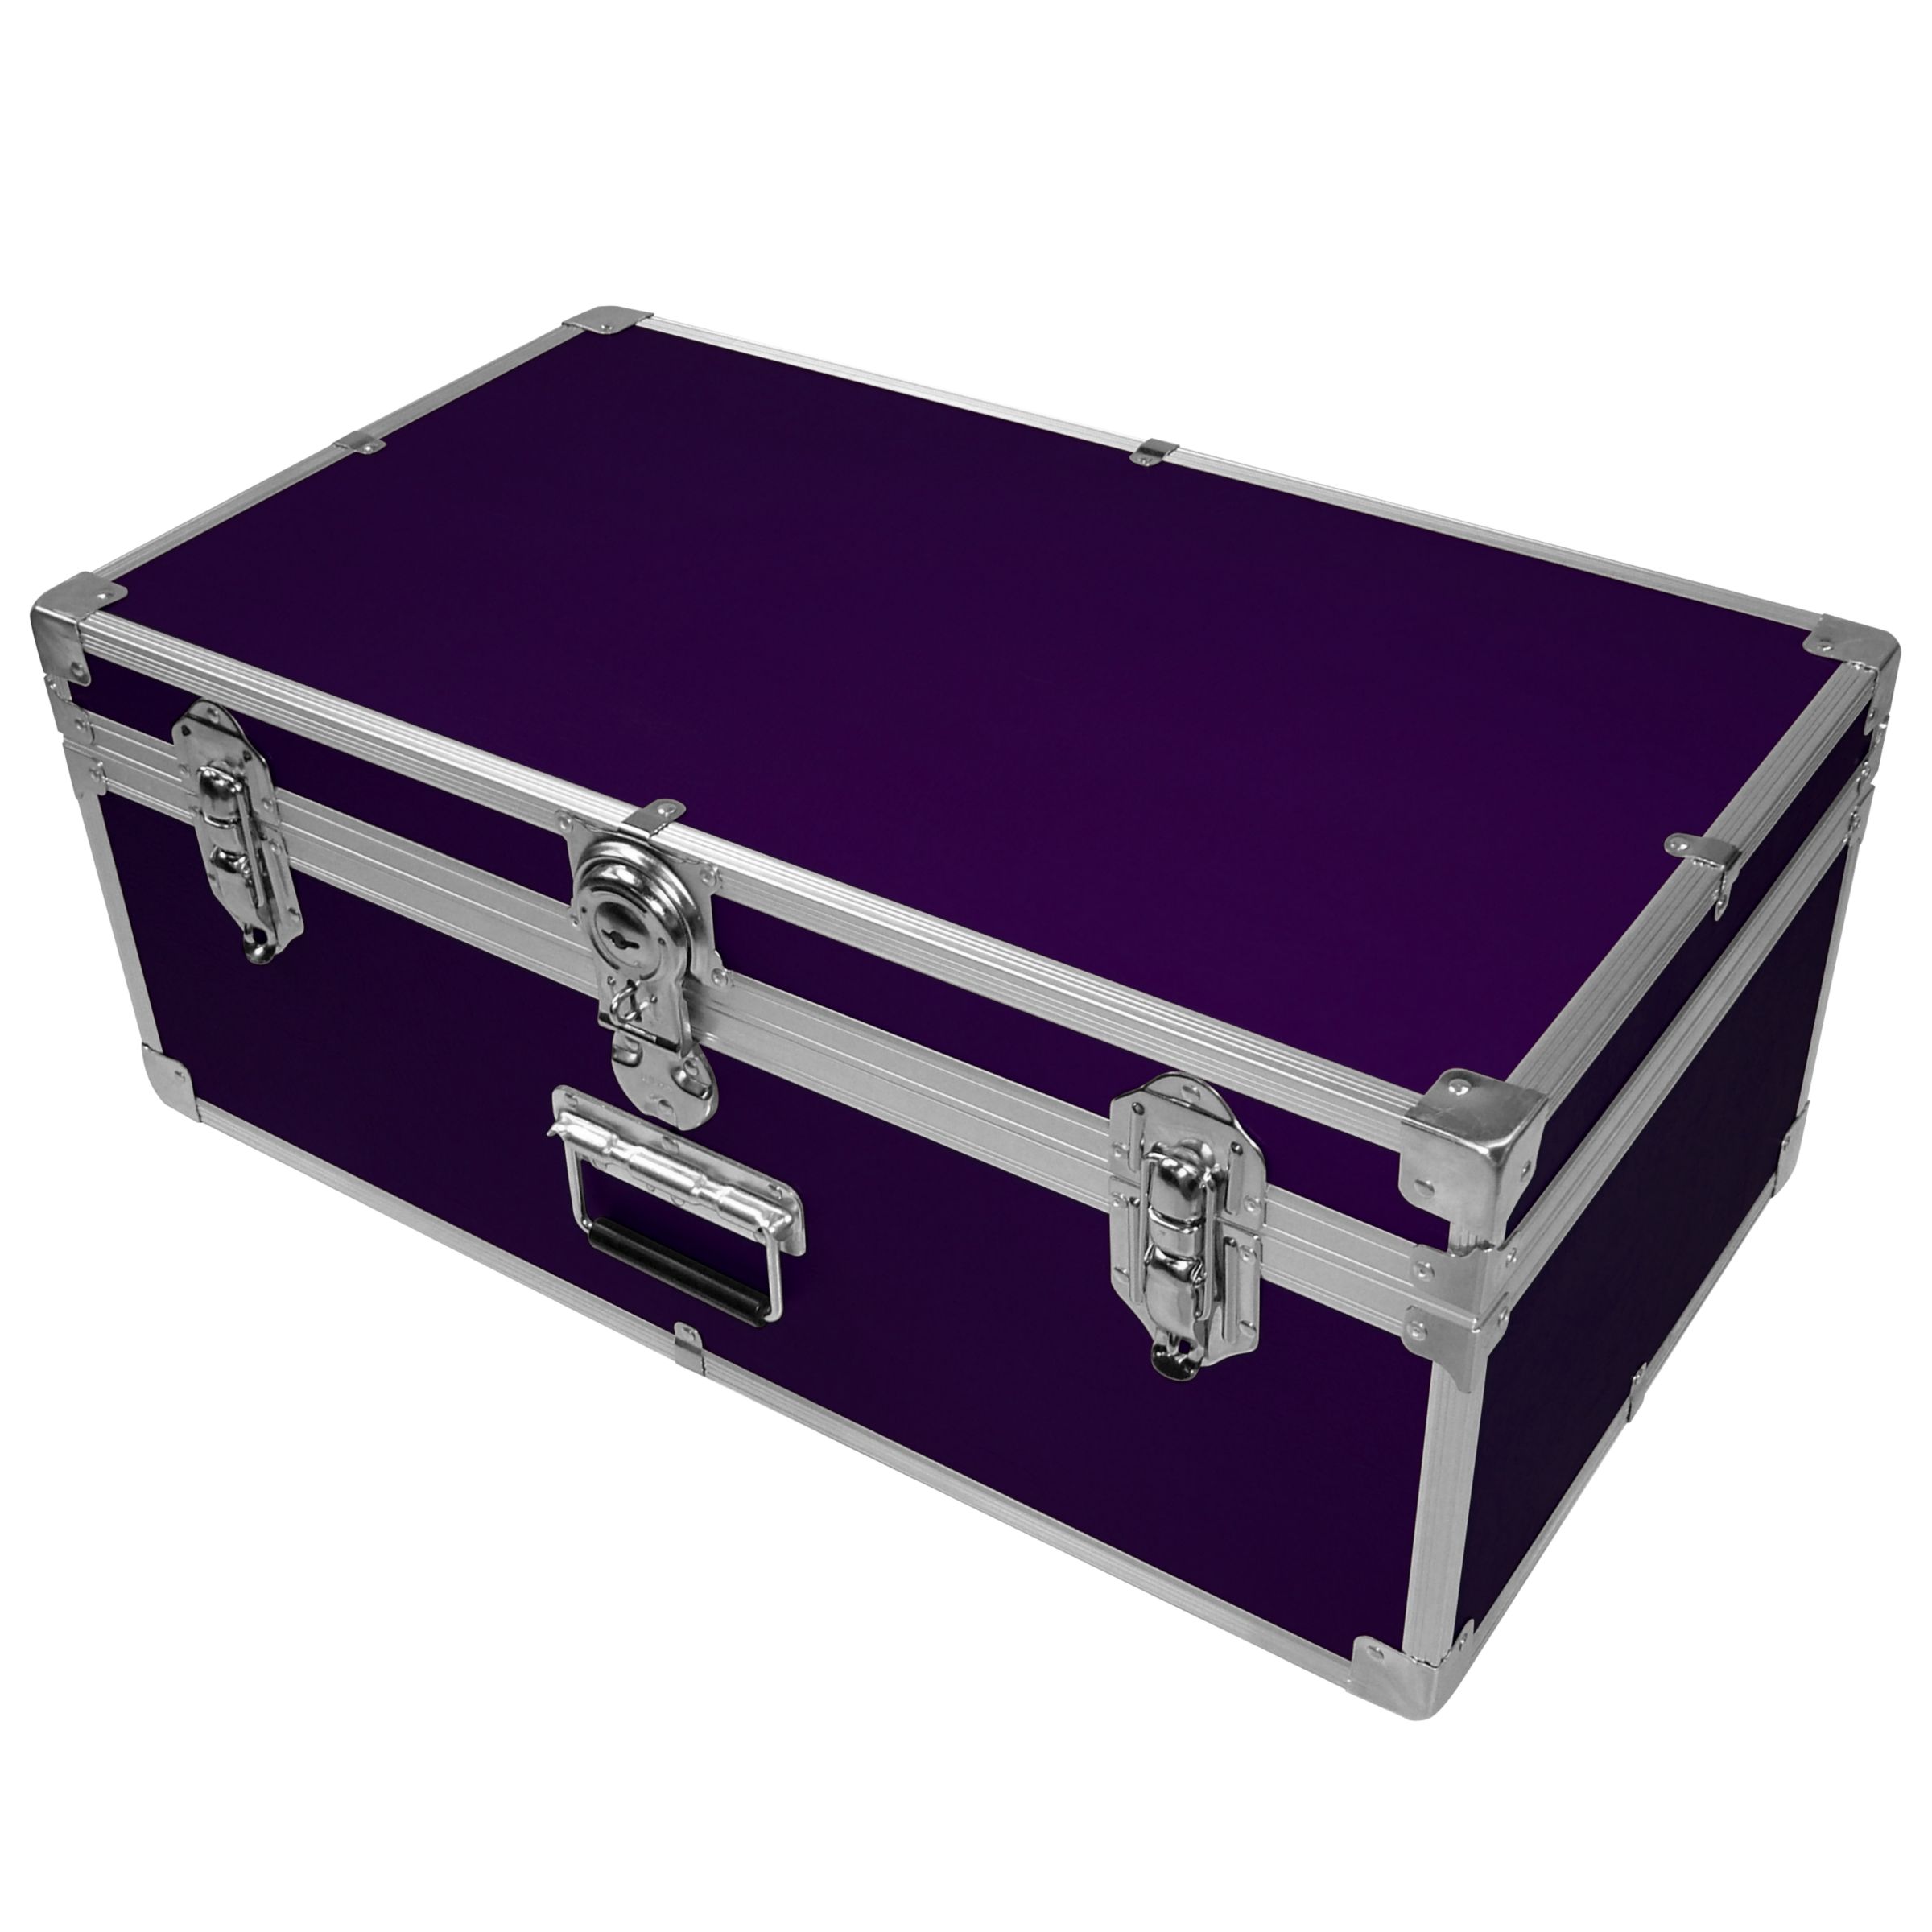 John Lewis Fortified Attache Trunk, Purple at JohnLewis